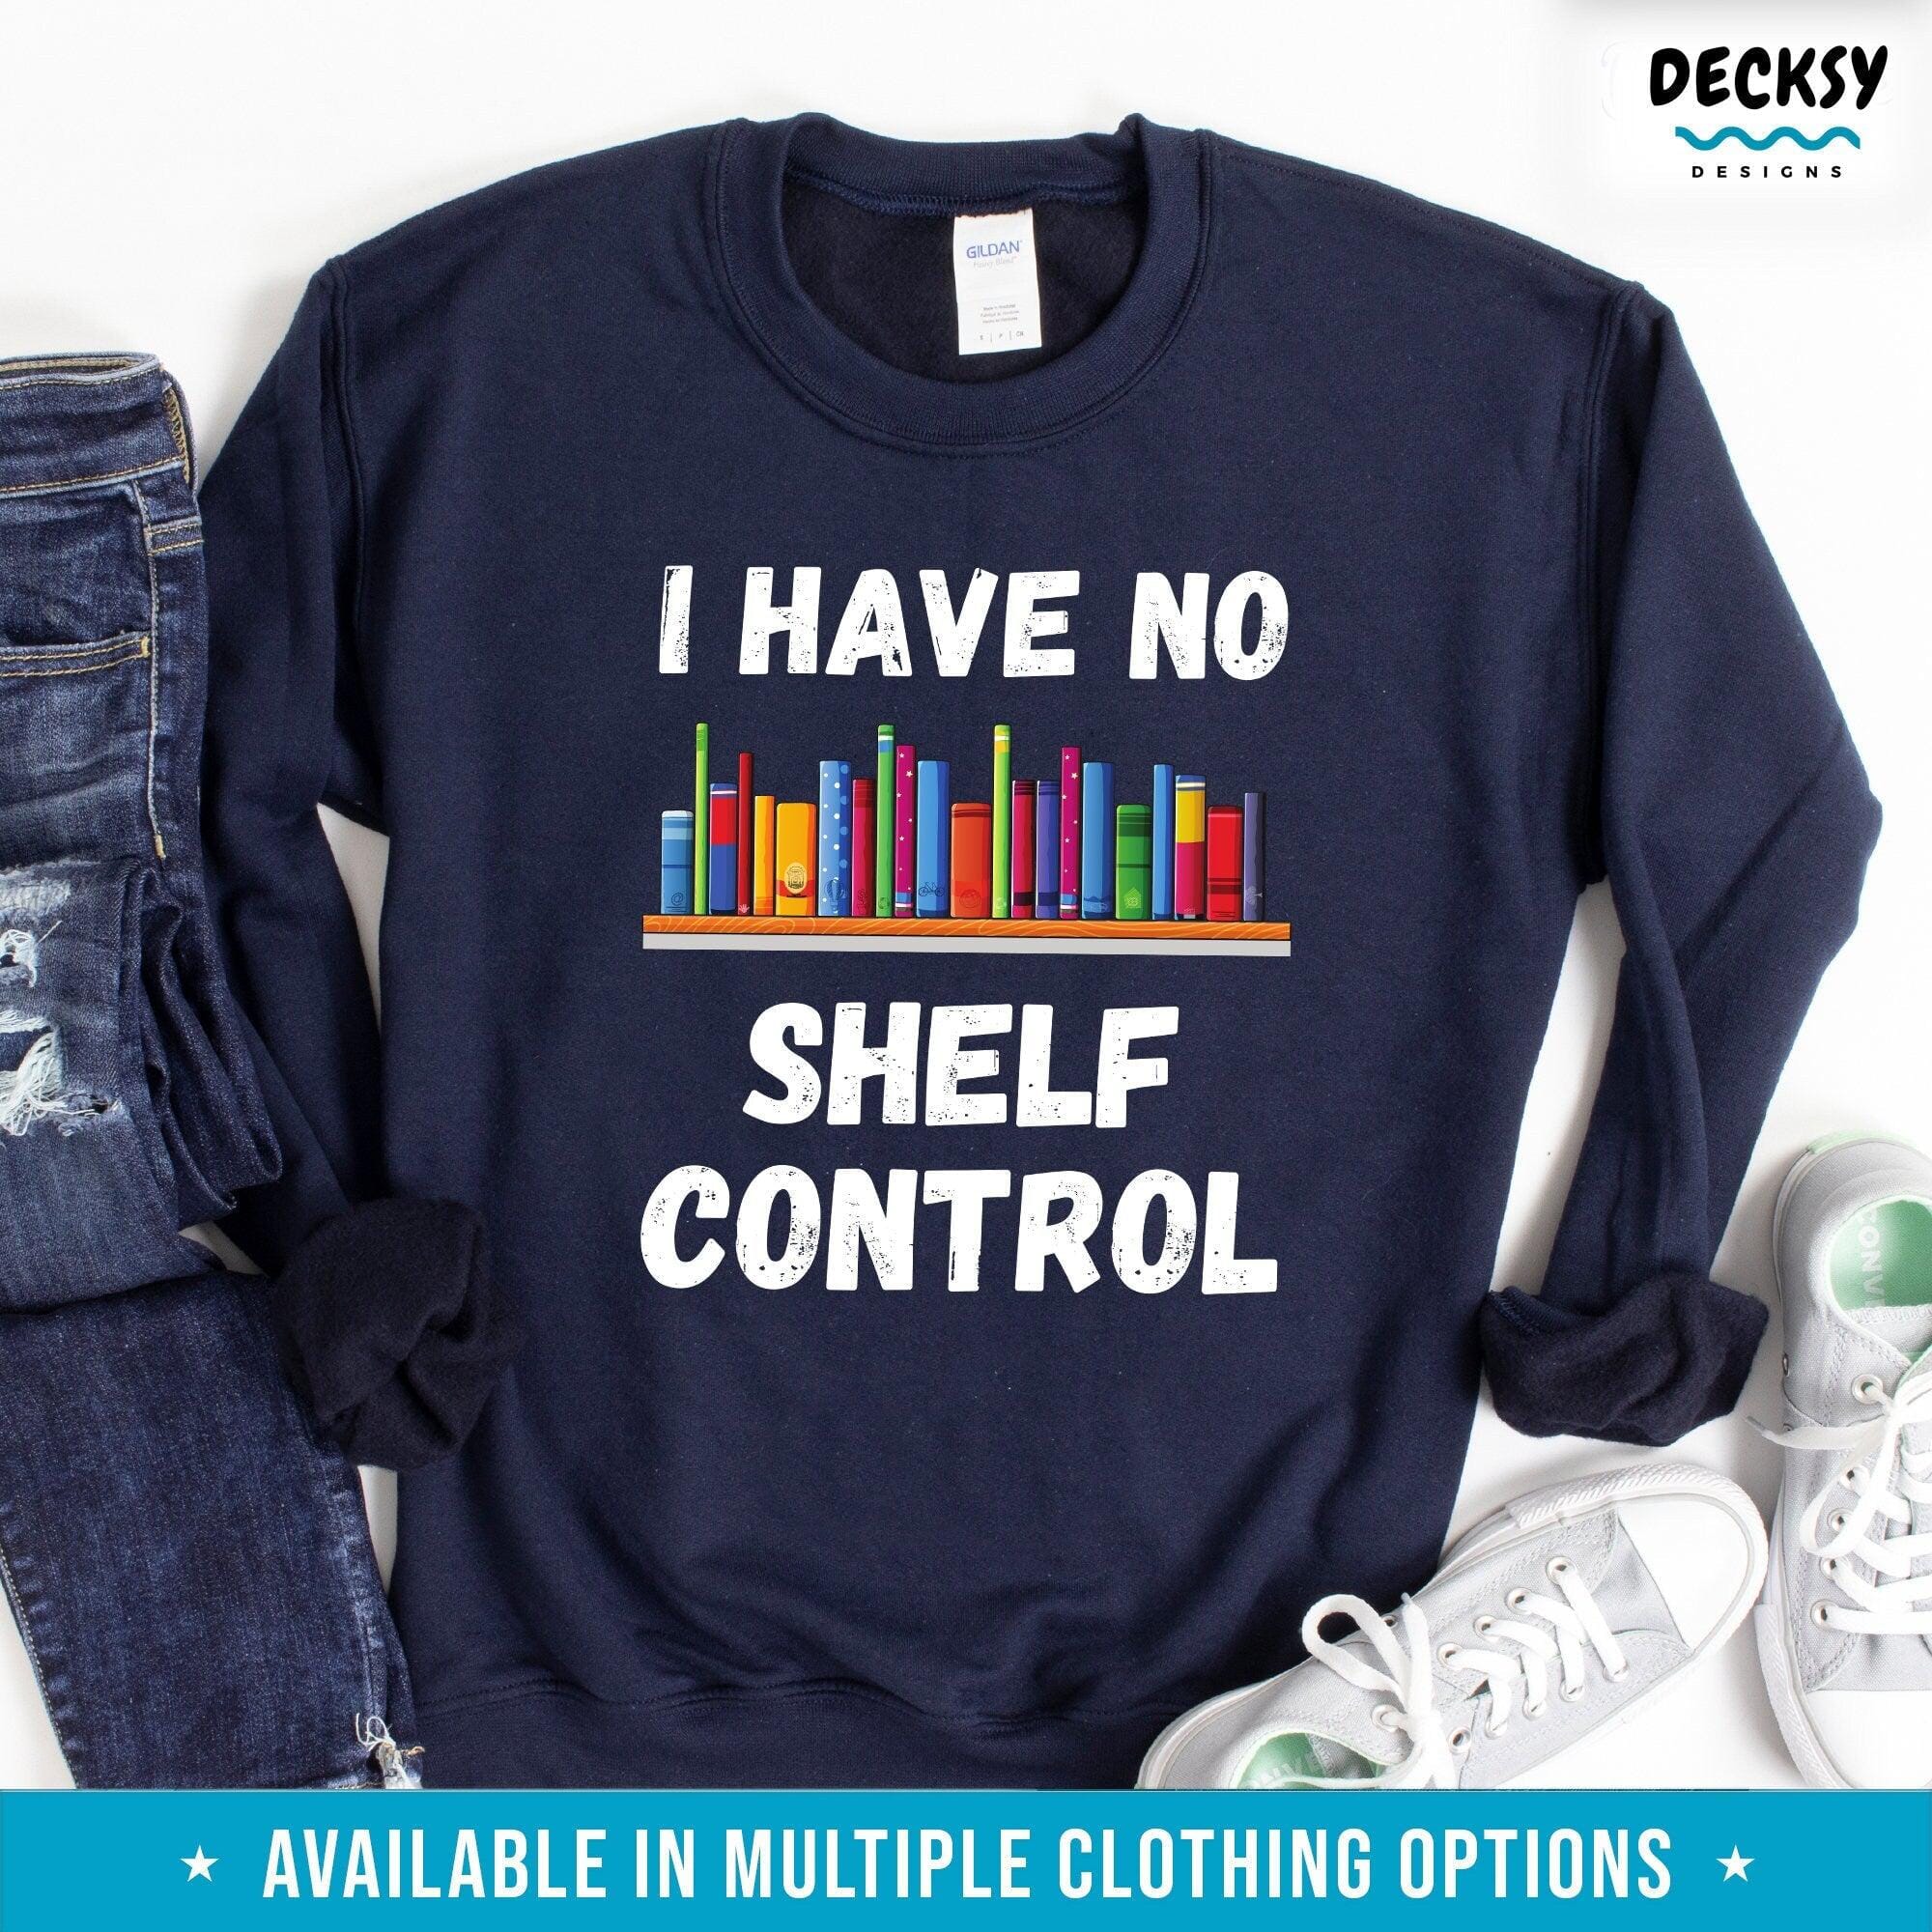 Reader Tshirt, Gift For Book Lover-Clothing:Gender-Neutral Adult Clothing:Tops & Tees:T-shirts:Graphic Tees-DecksyDesigns